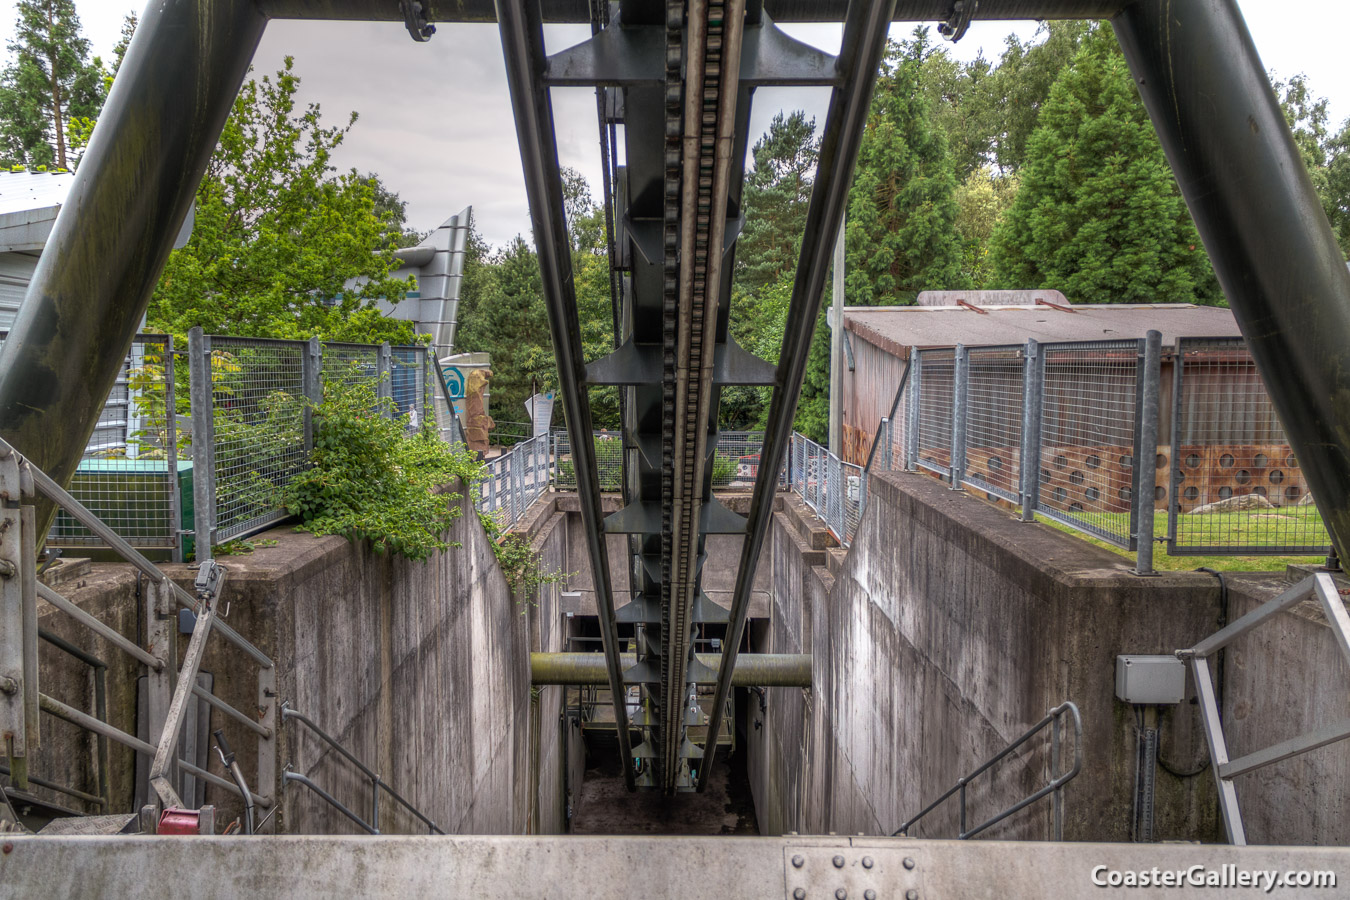 Galactica (Air) roller coaster lift hill below ground - pictures of Alton Towers